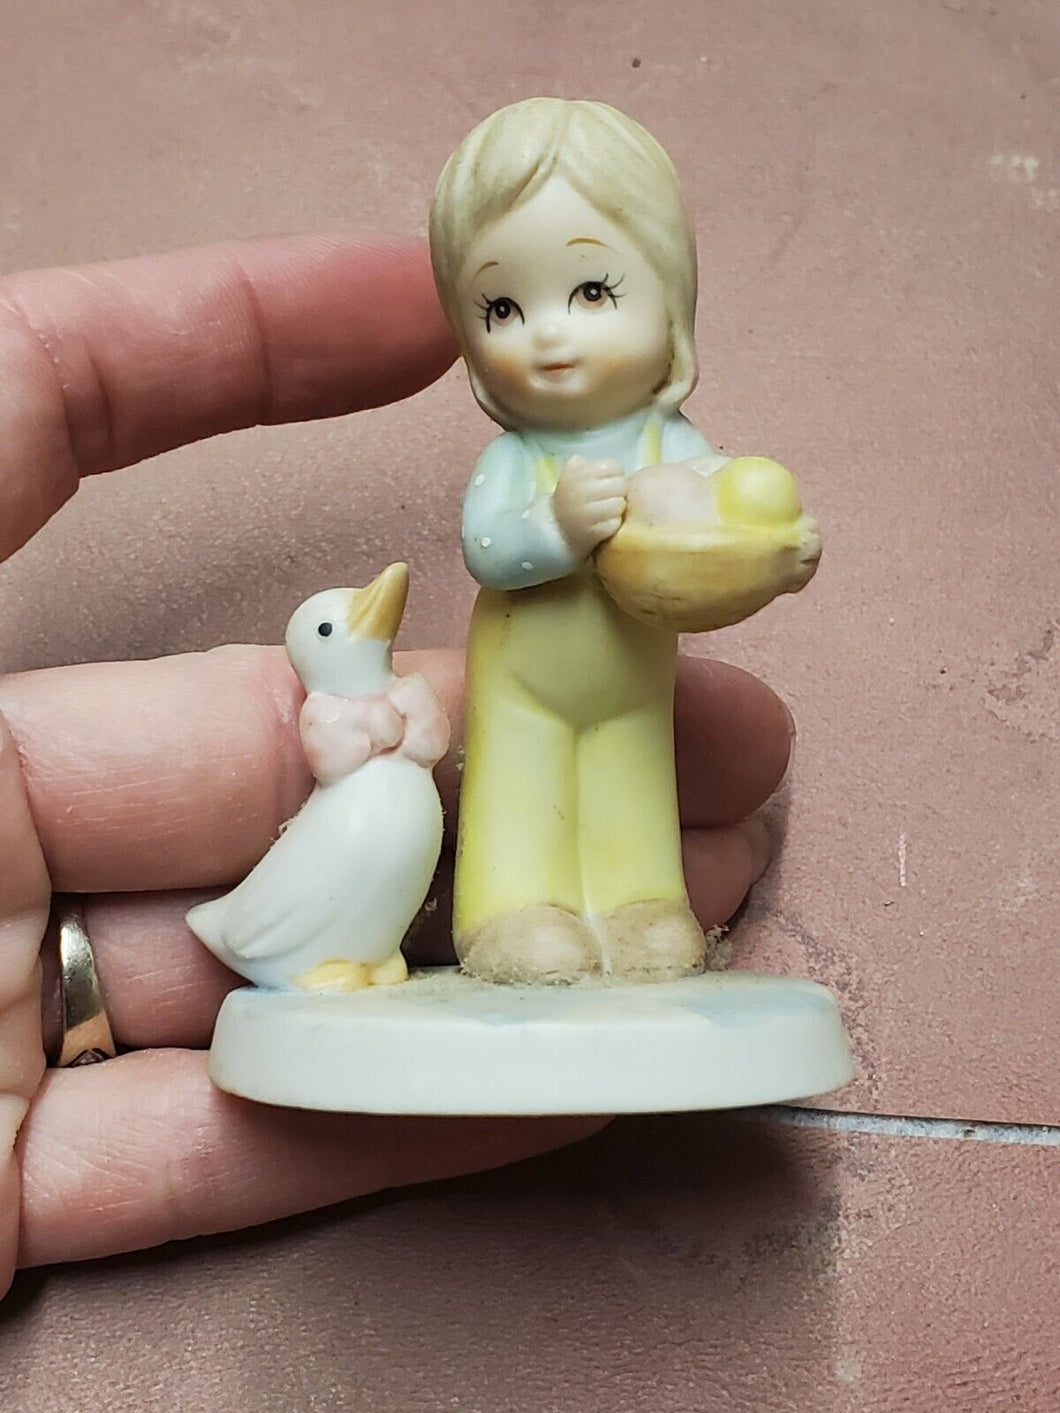 Vintage 1986 Lefton China Girl With Duck Little Treasures Hand Painted Figurine